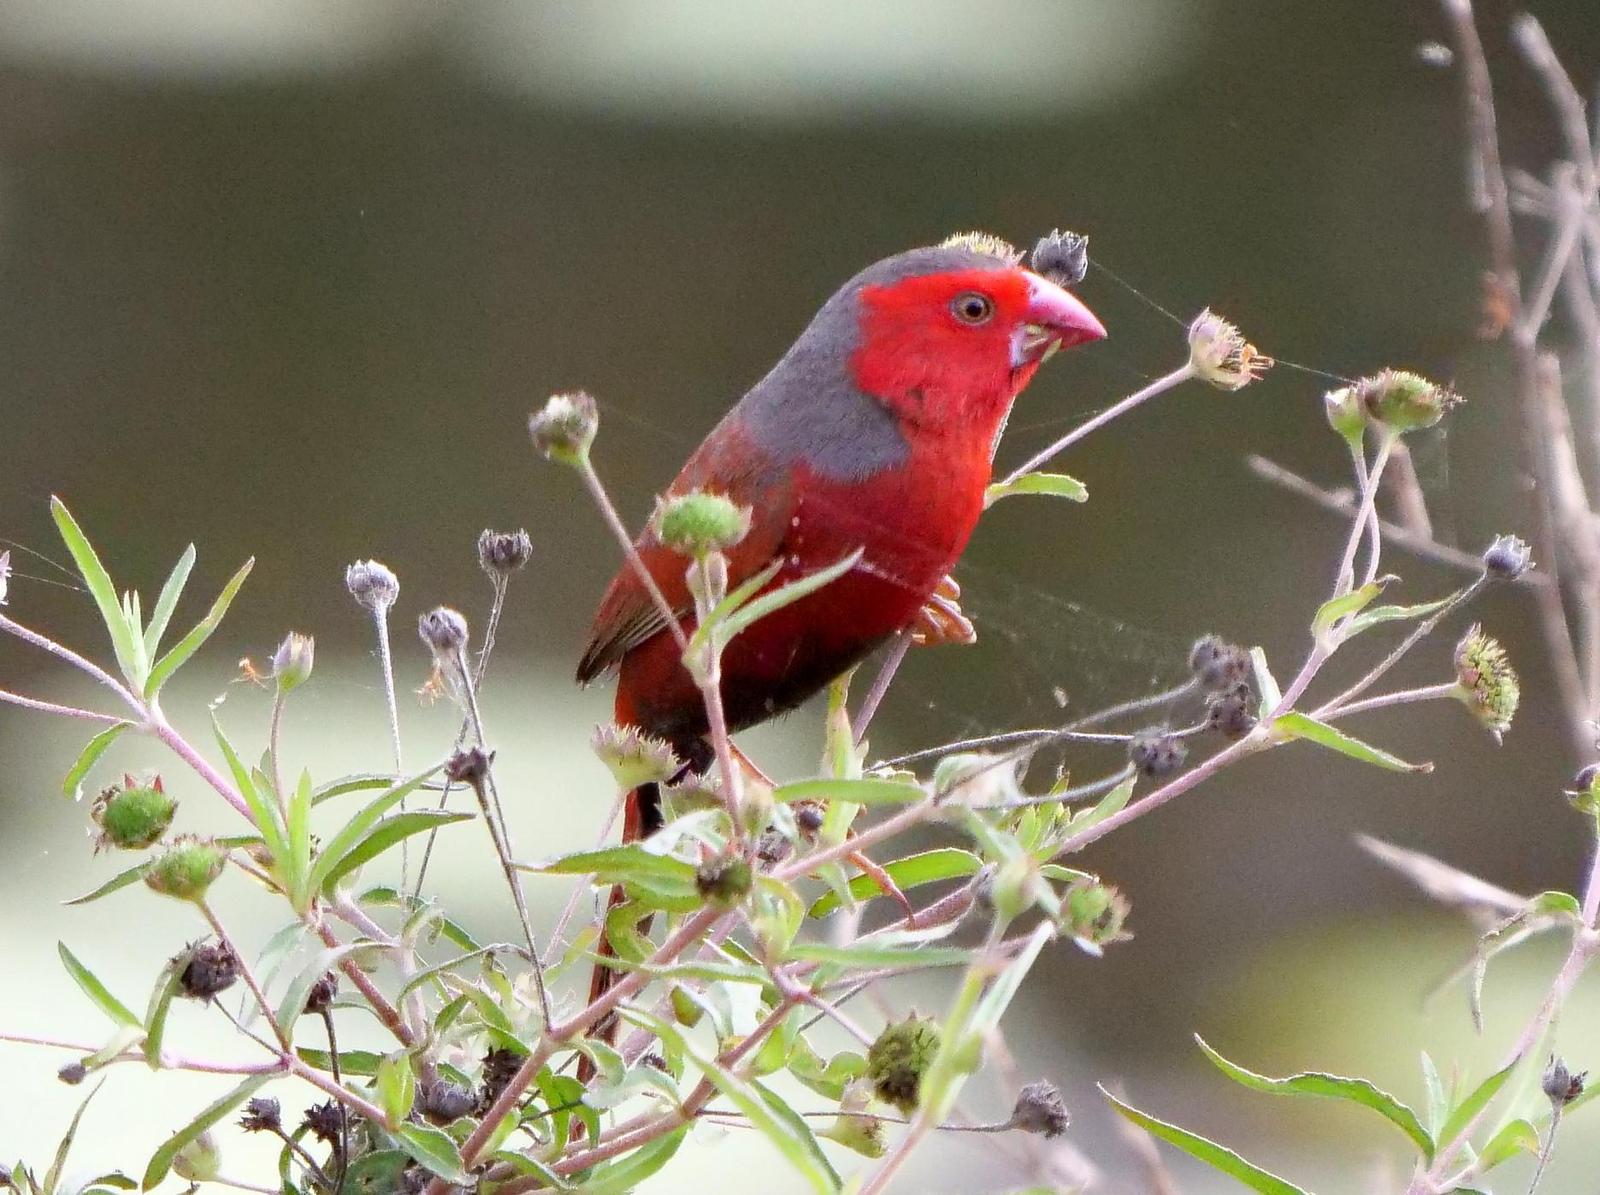 Crimson Finch Photo by Peter Lowe